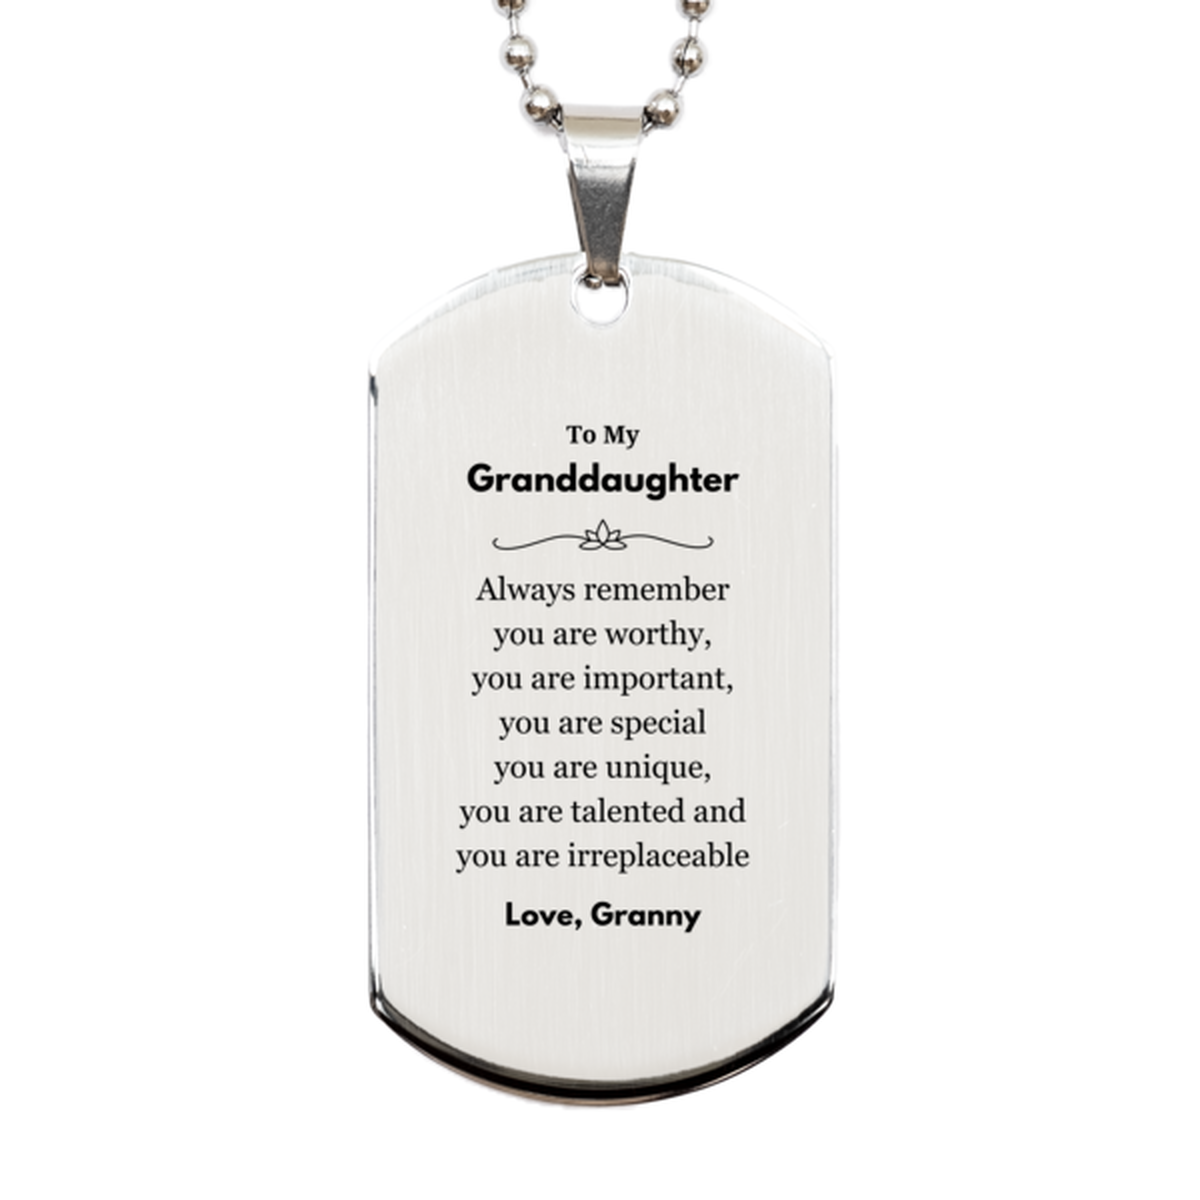 Granddaughter Birthday Gifts from Granny, Inspirational Silver Dog Tag for Granddaughter Christmas Graduation Gifts for Granddaughter Always remember you are worthy, you are important. Love, Granny